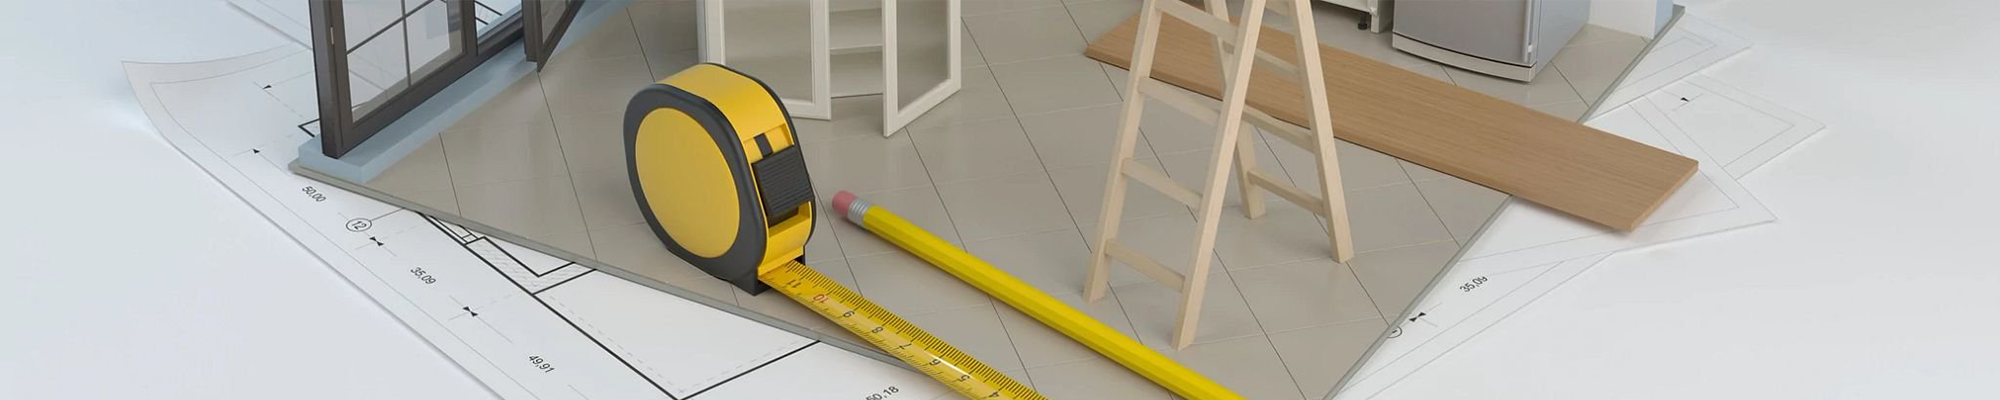 measurement tools for flooring from iRenovate Real Estate in Denton